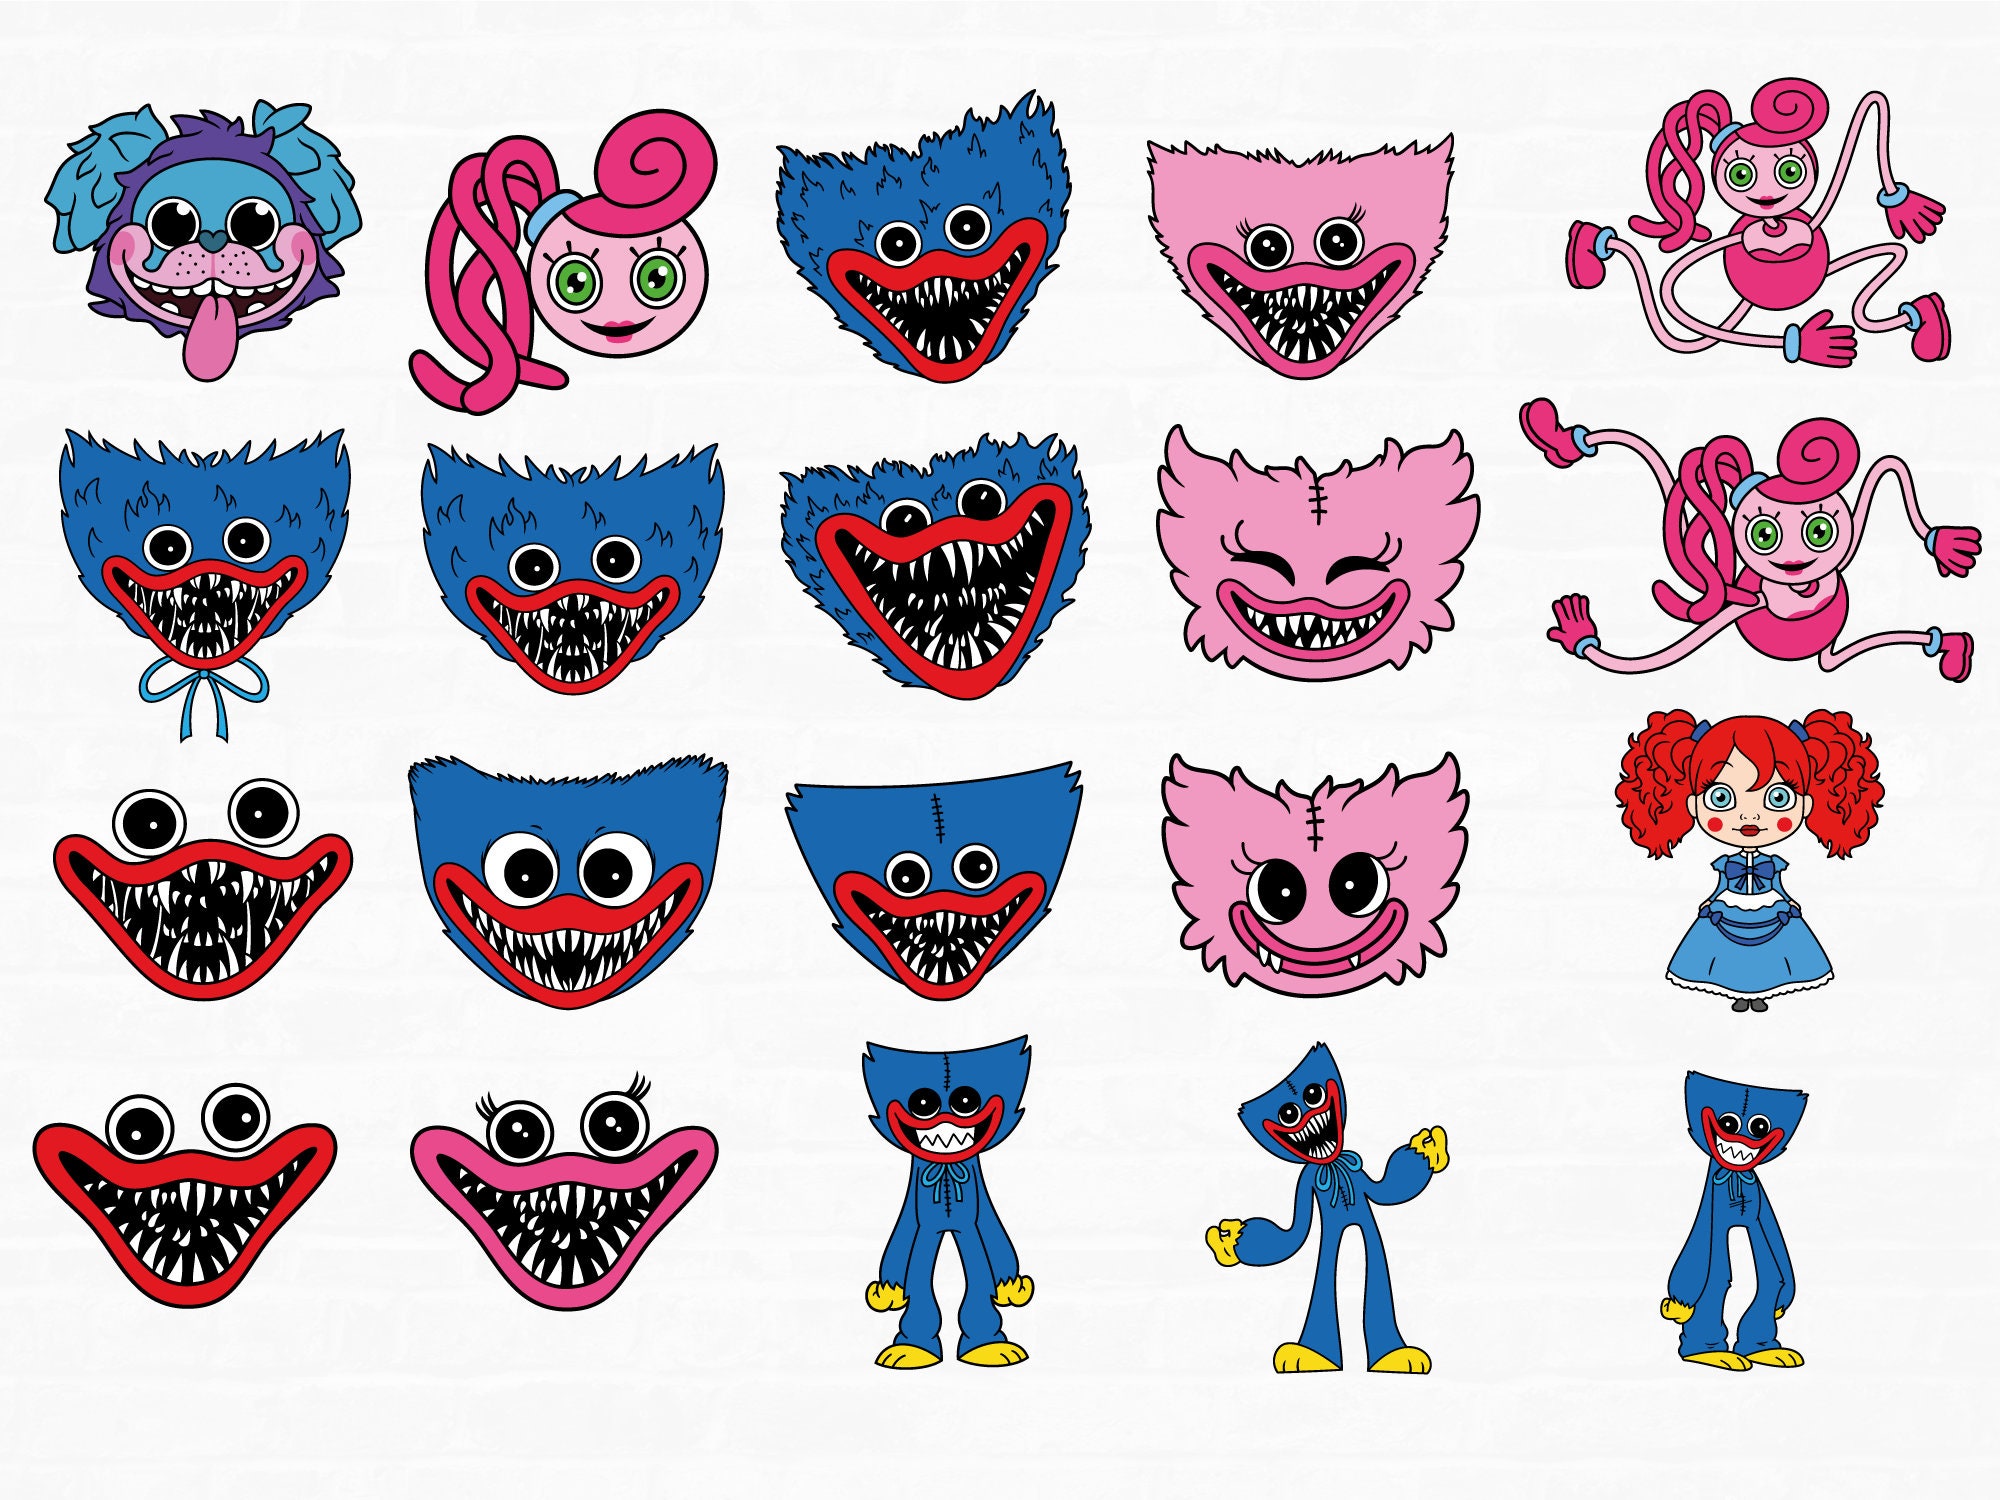 Poppy Playtime / Project Playtime Huggy Wuggy SET of 6 EMOTES 